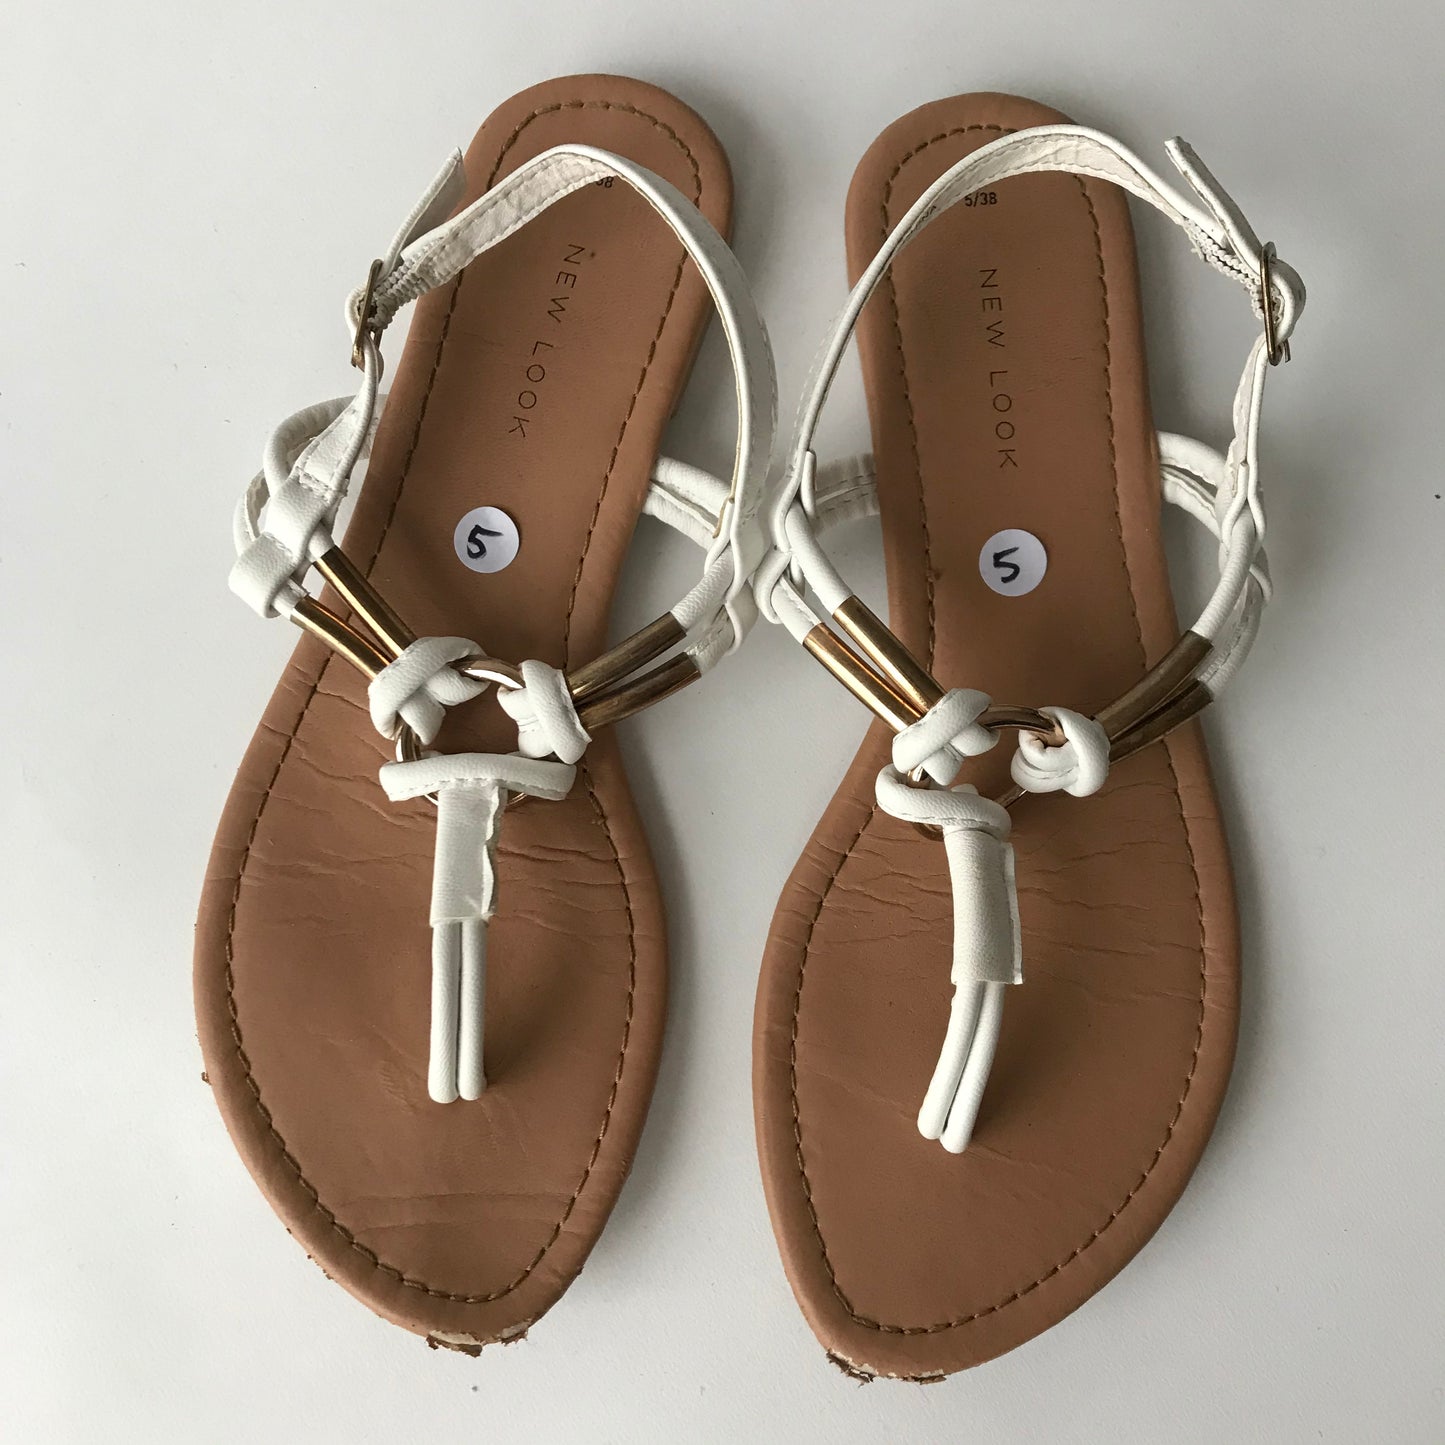 Sandals - White New Look - Shoe Size 5